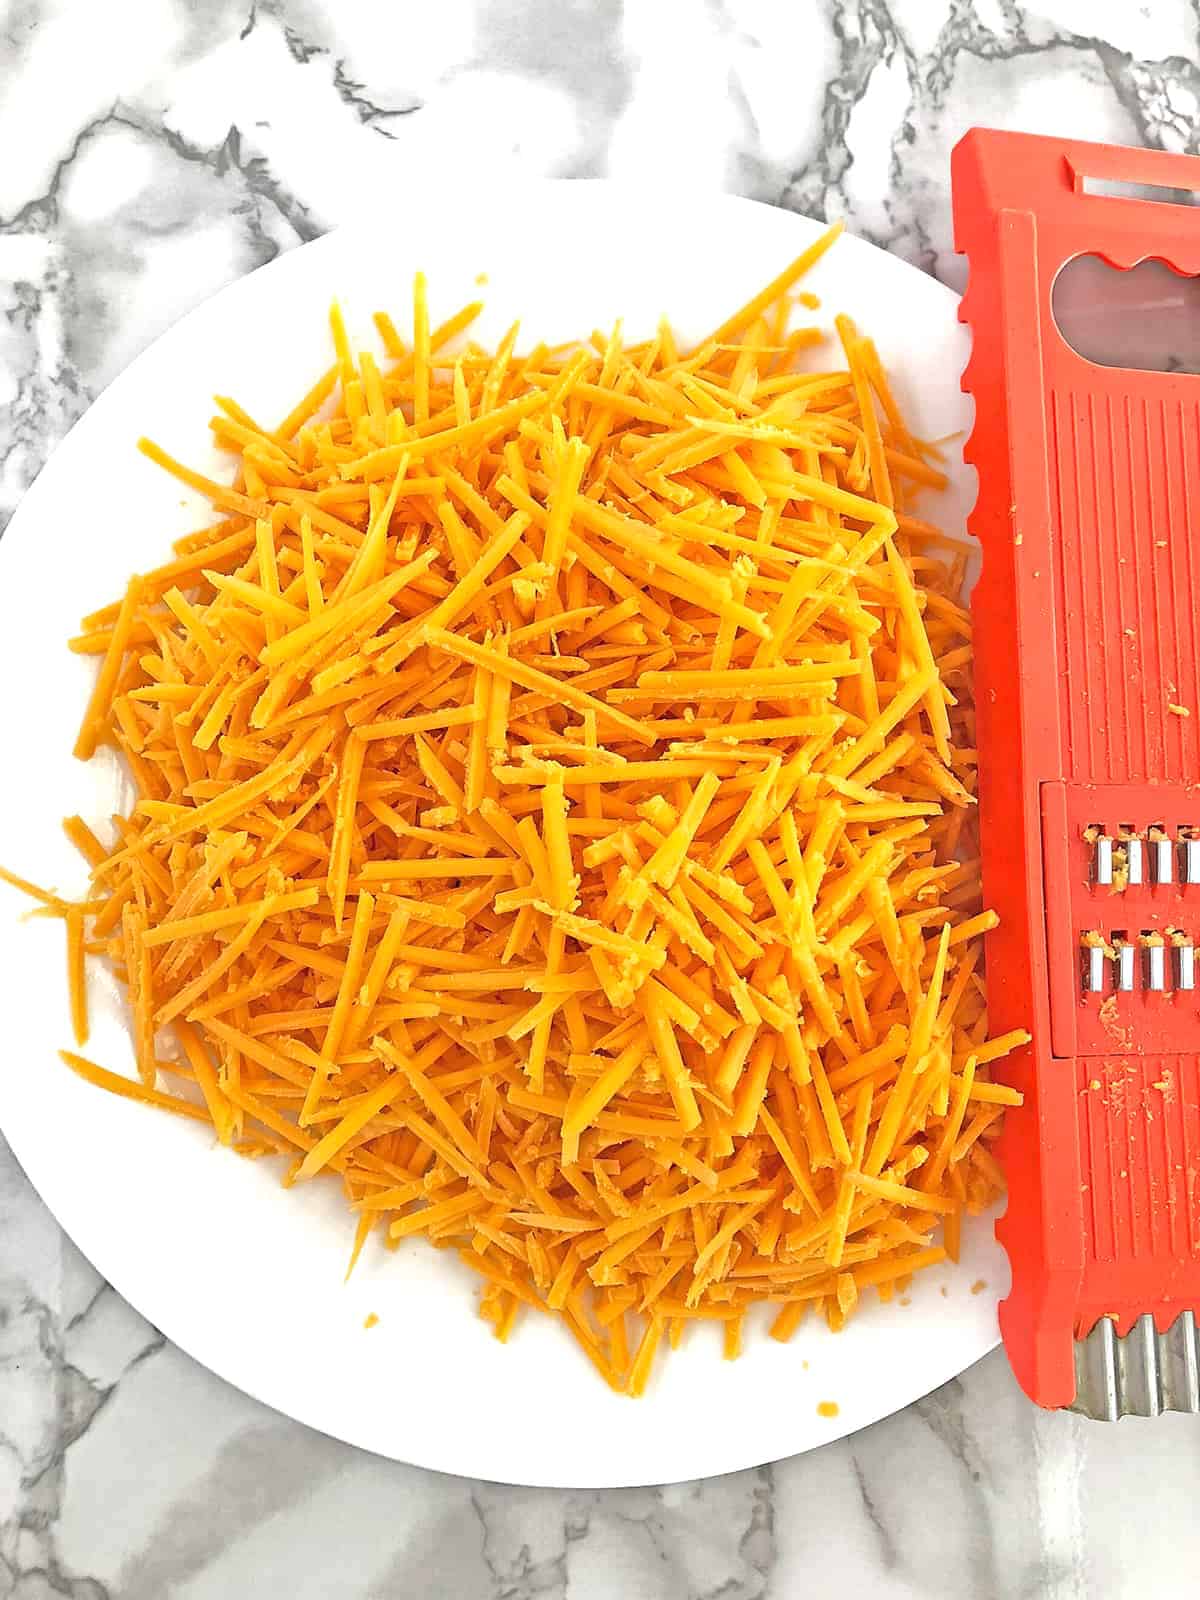 While the above ingredients are cooling down, shred the cheese.